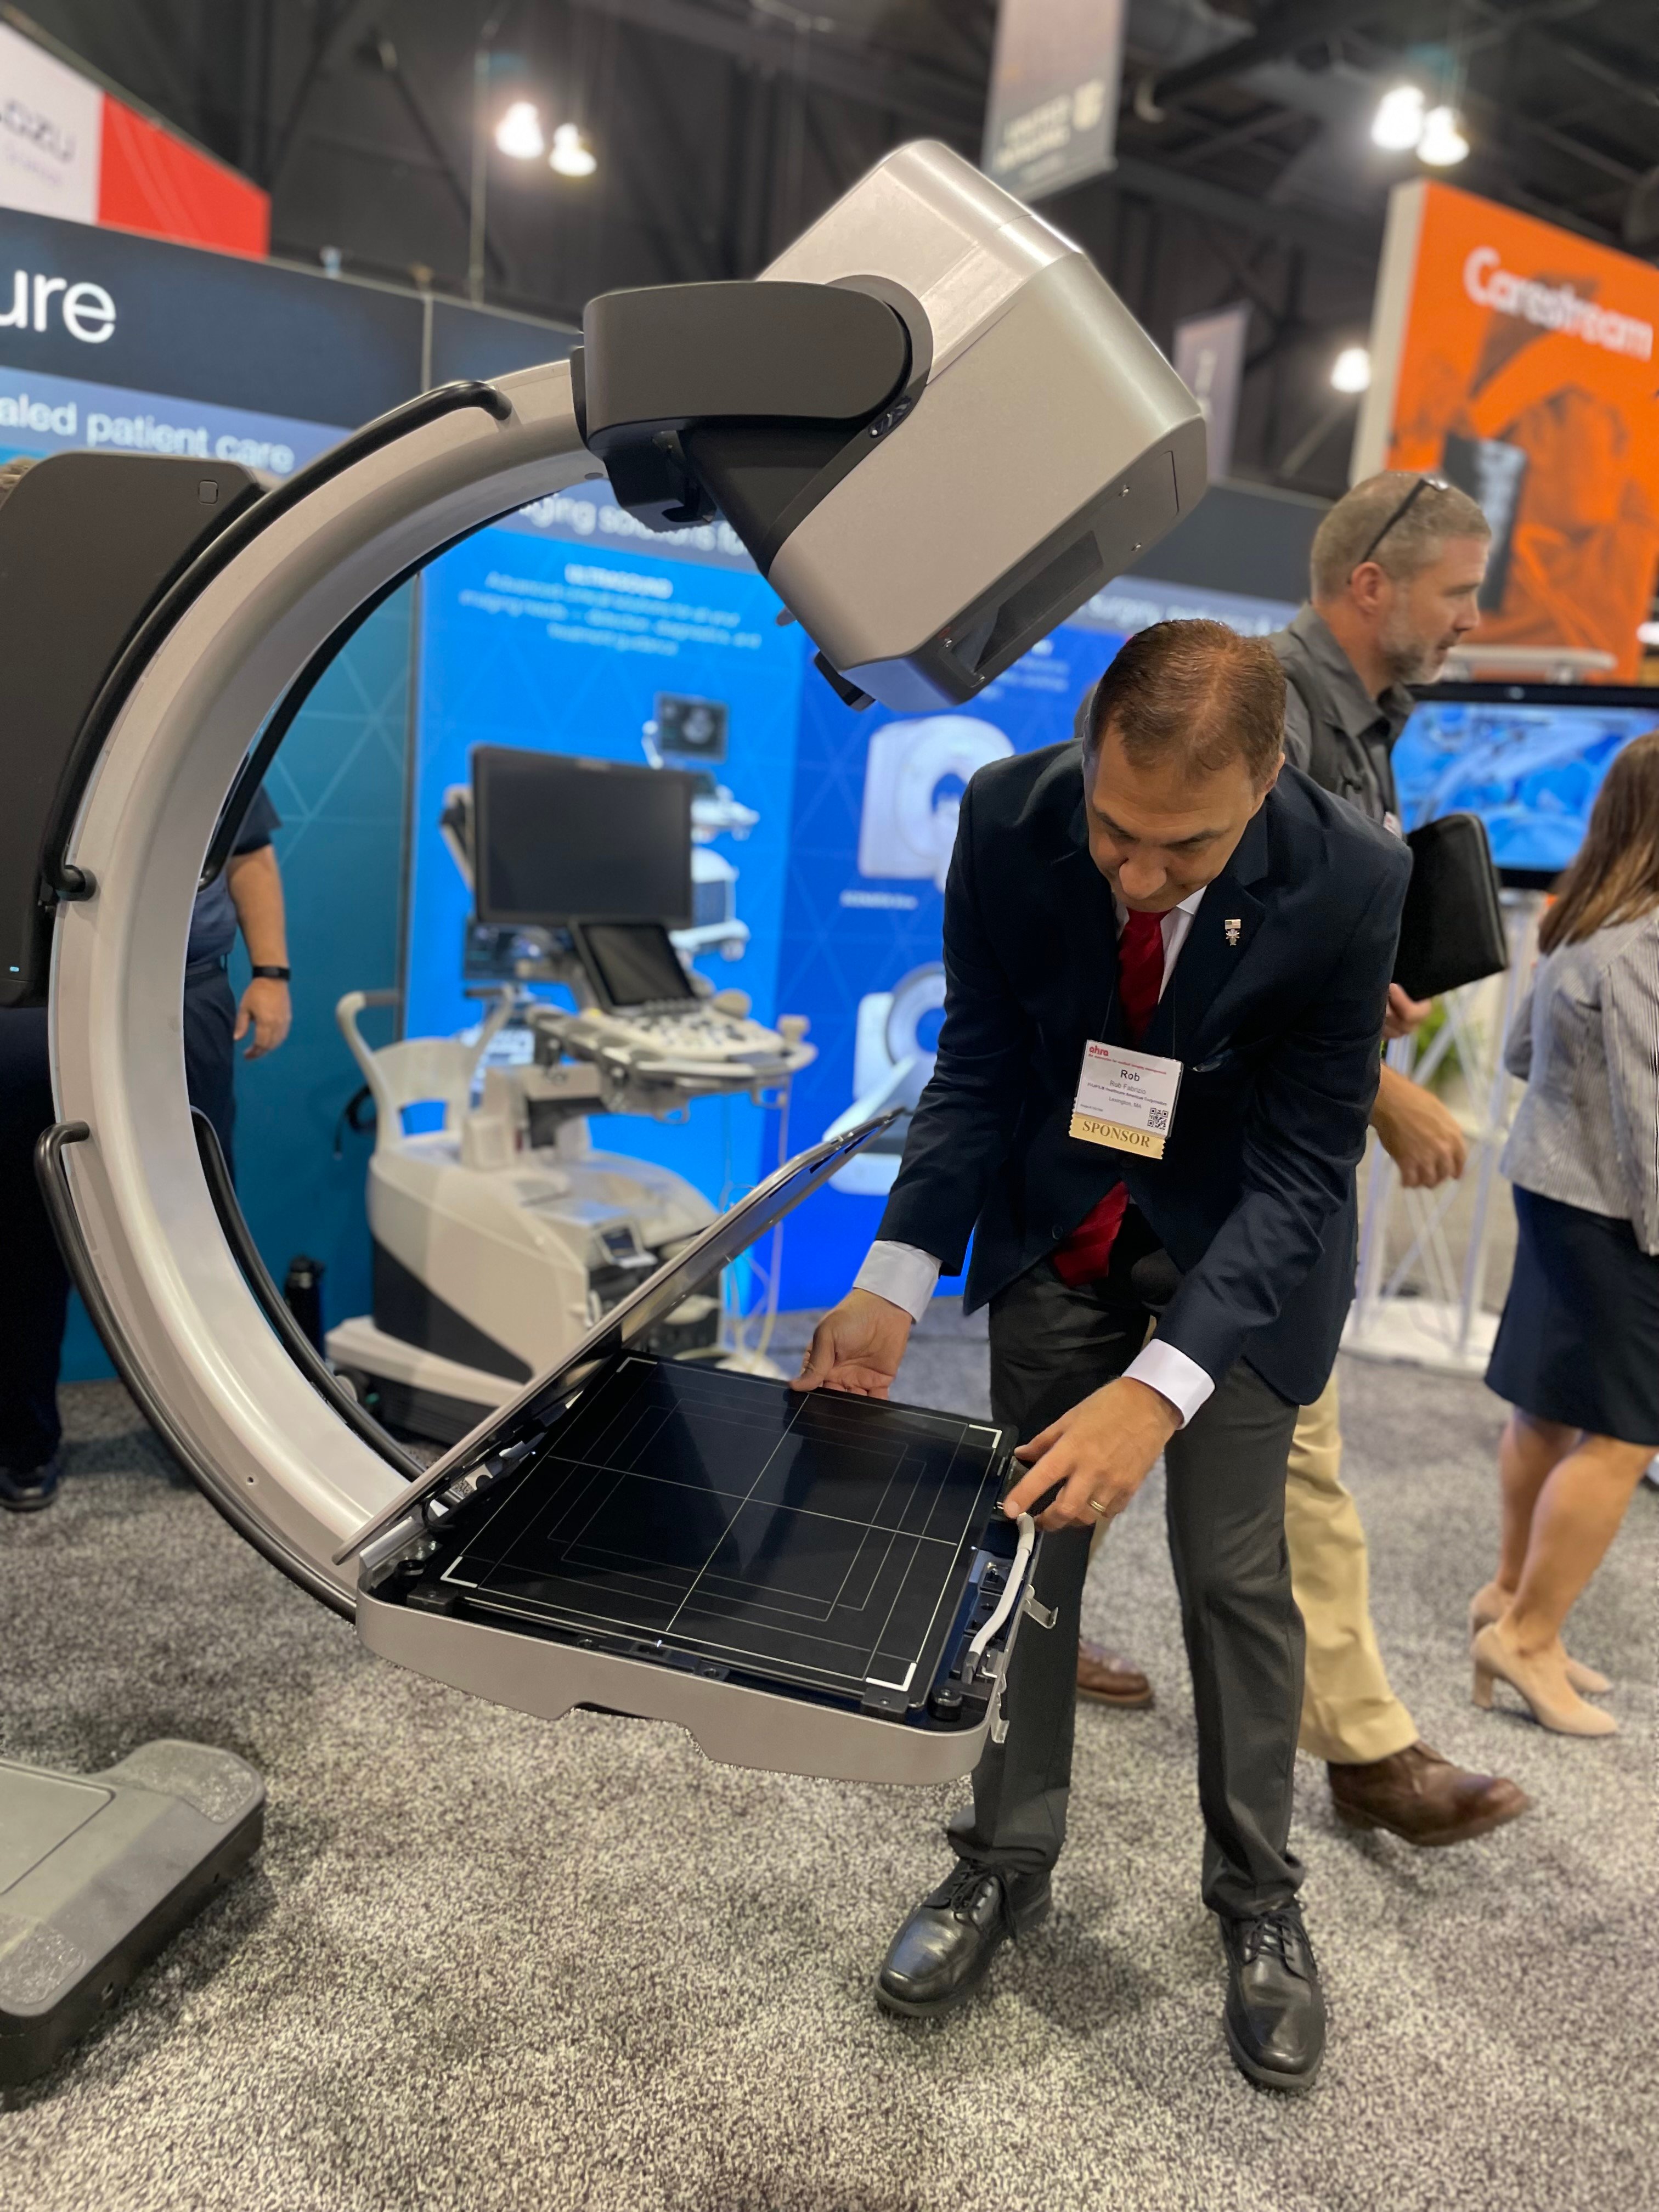 Rob Fabrizio, director of strategic marketing, medical imaging systems, Fujifilm Healthcare Americas Corporation, demonstrates the FDR Cross, Fujifilm’s newly developed hybrid C-arm and portable X-ray solution designed for intensive care, emergency room and intraoperative use, at #AHRA22. 